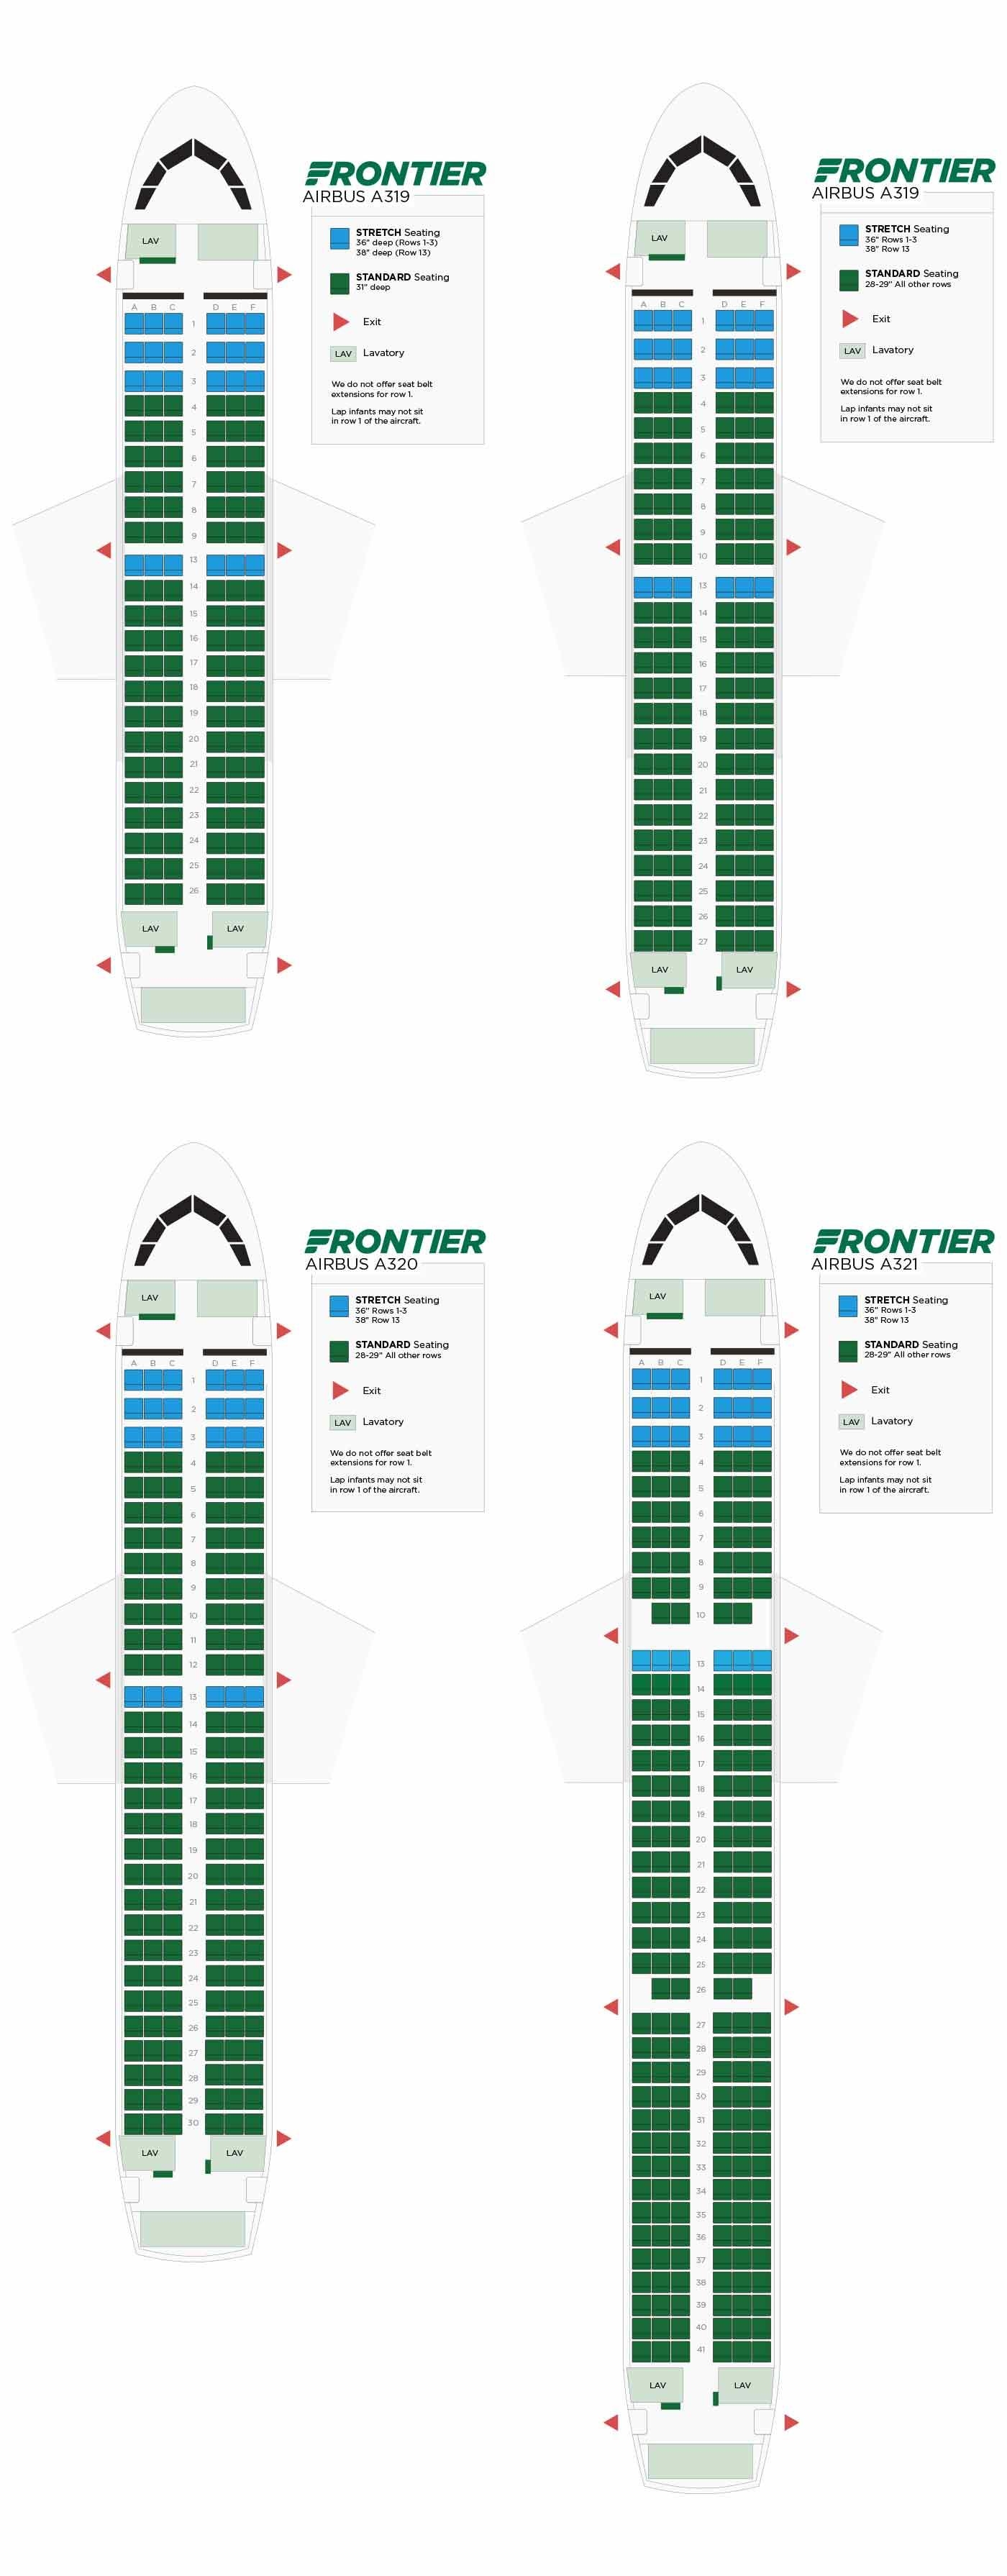 frontier airlines seat assignment